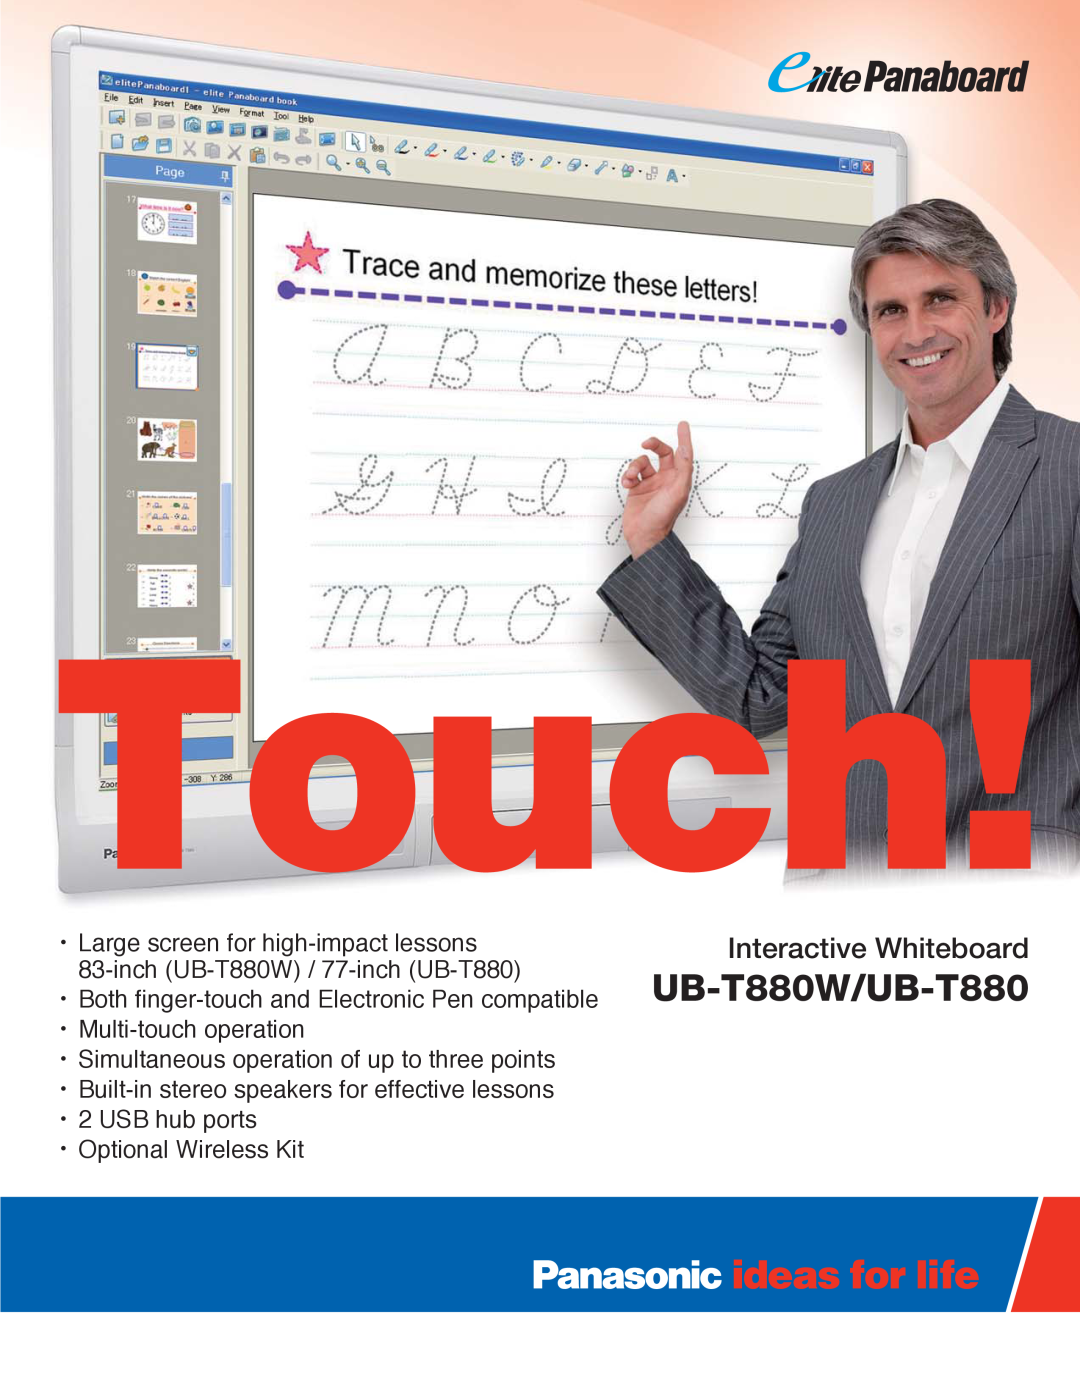 Panasonic manual Touch, UB-T880W/UB-T880, Interactive Whiteboard, ・ Large screen for high-impact lessons 